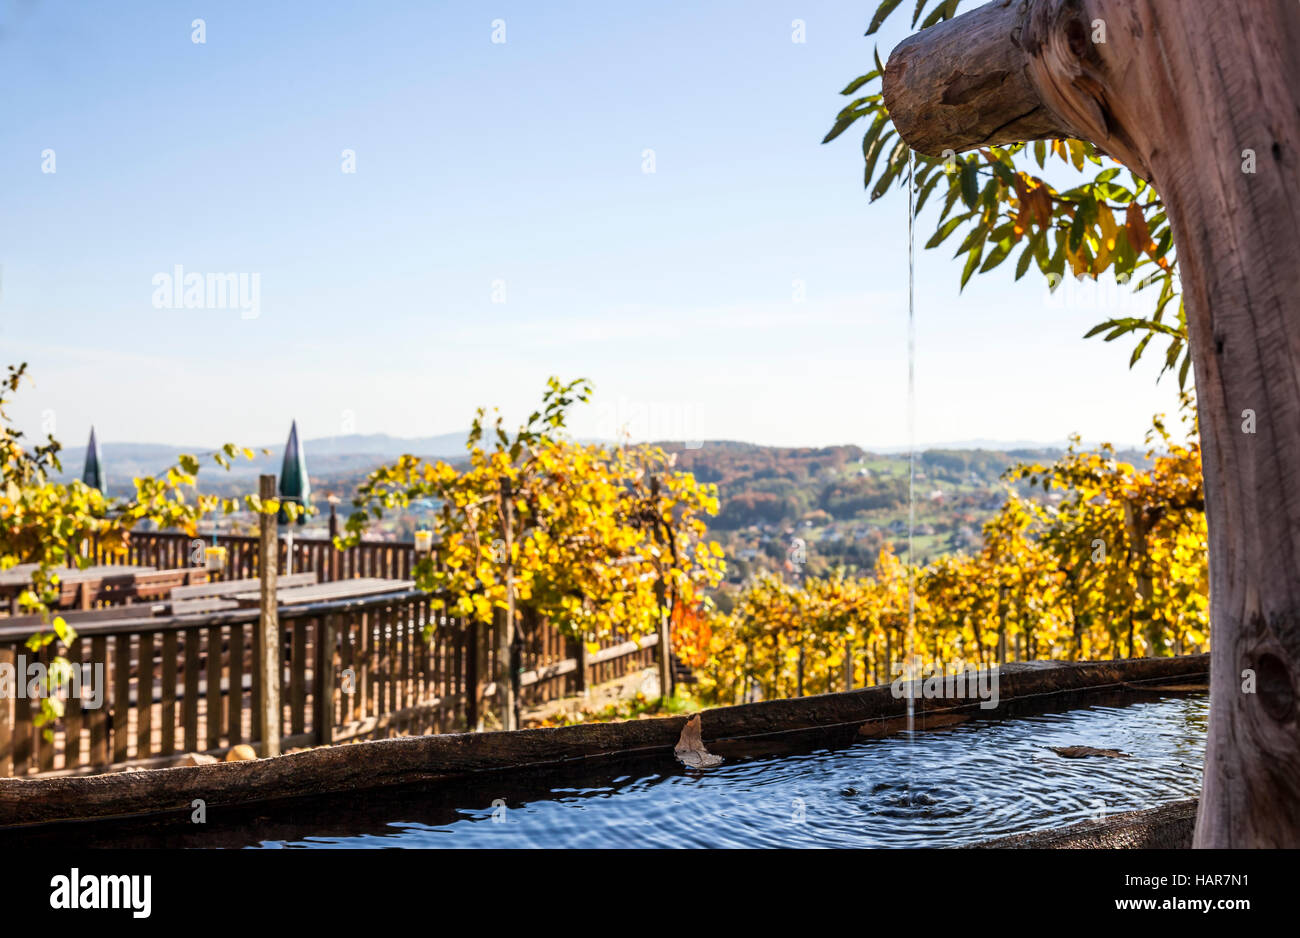 Wooden fountain with fresh clear water in garten with vineyards and terrace on vine route in Styria, Austria Stock Photo